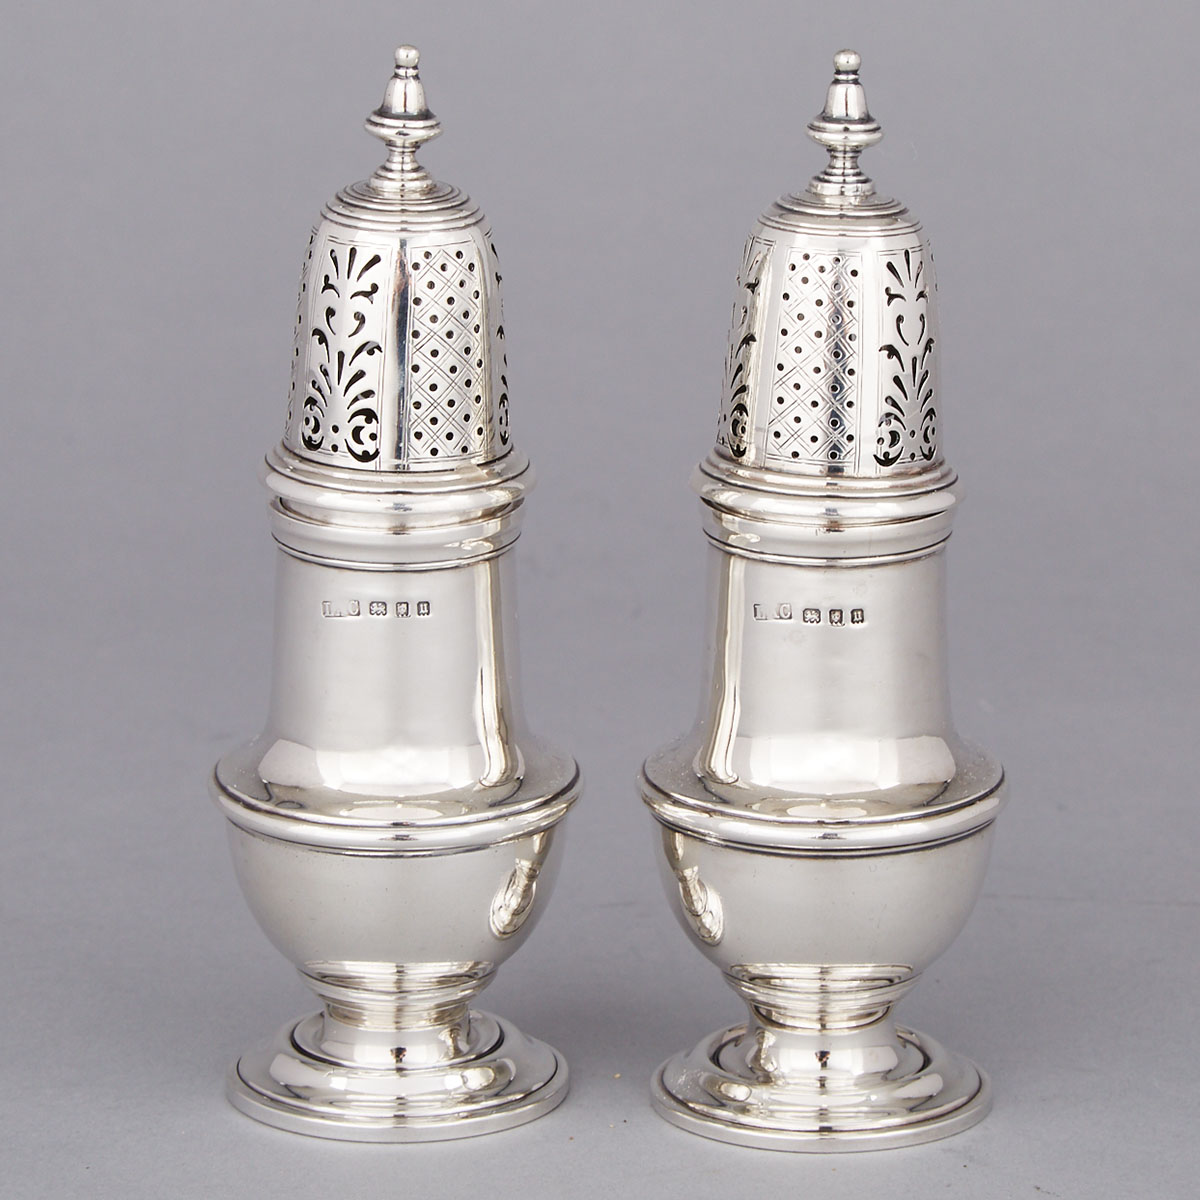 Pair of English Silver Baluster Casters, Crichton Brothers, London, 1915